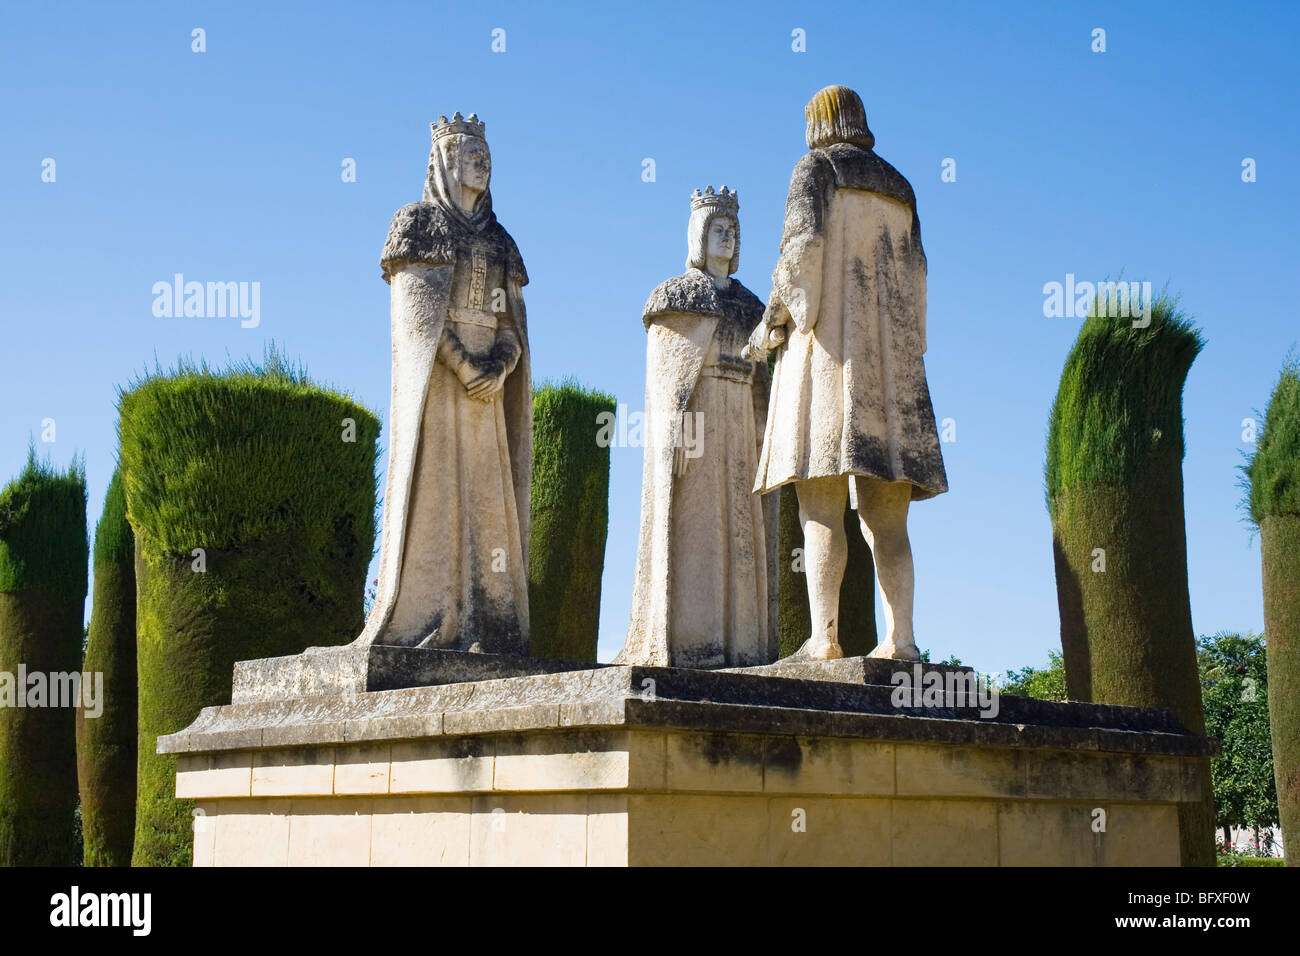 Statues of Christopher Columbus, King Ferdinand II of Aragon and Queen Isabella I of Castile in the gardens of the Alcazar Stock Photo